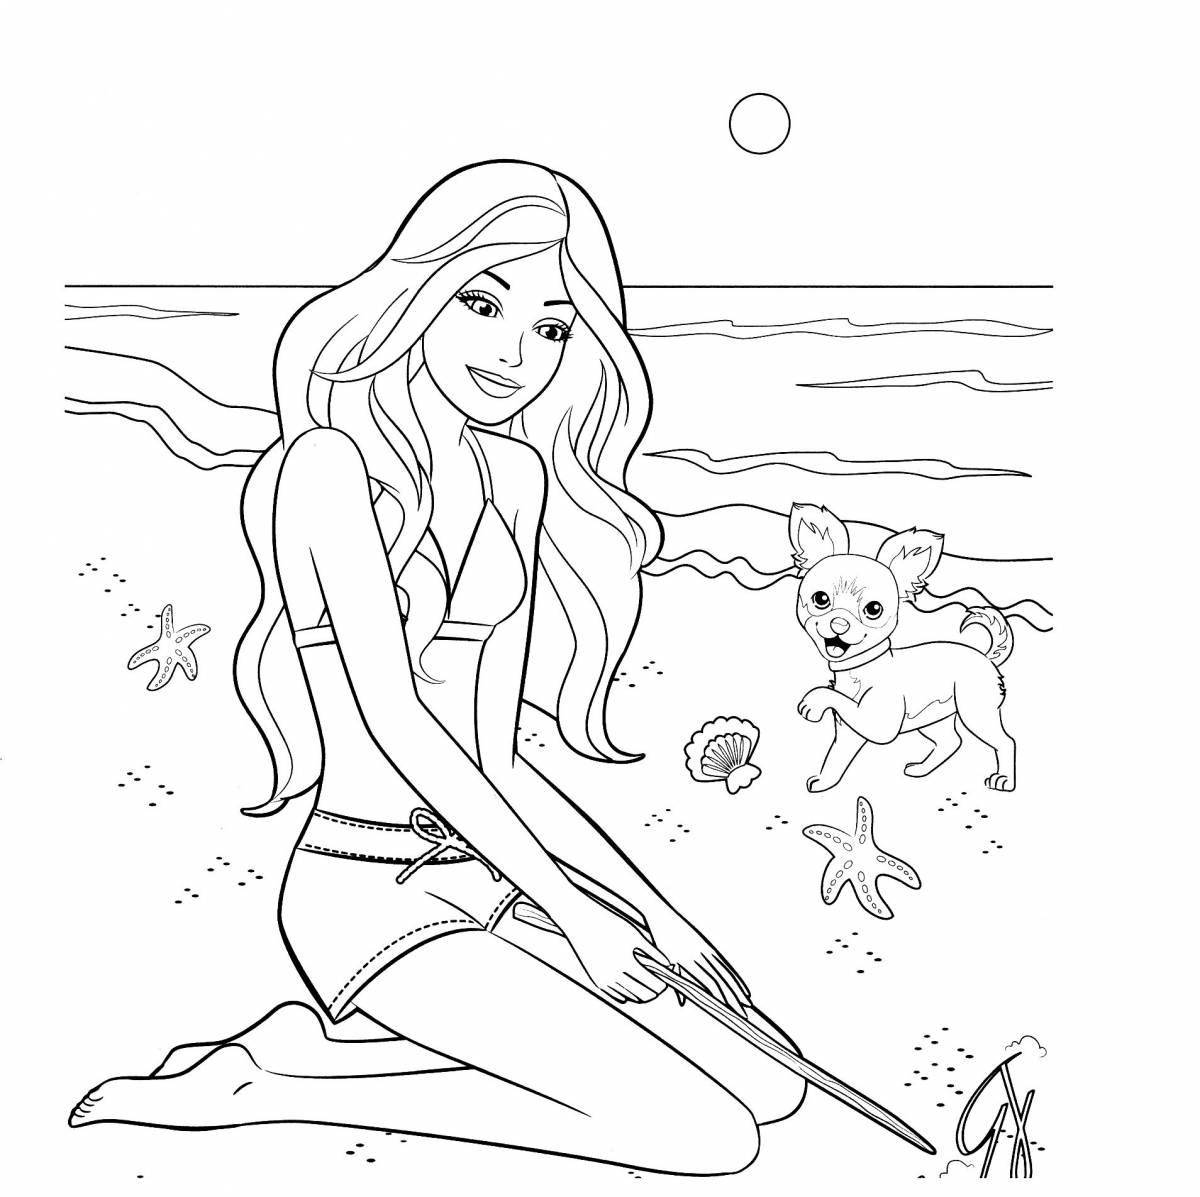 Coloring page luxury barbie in swimsuit